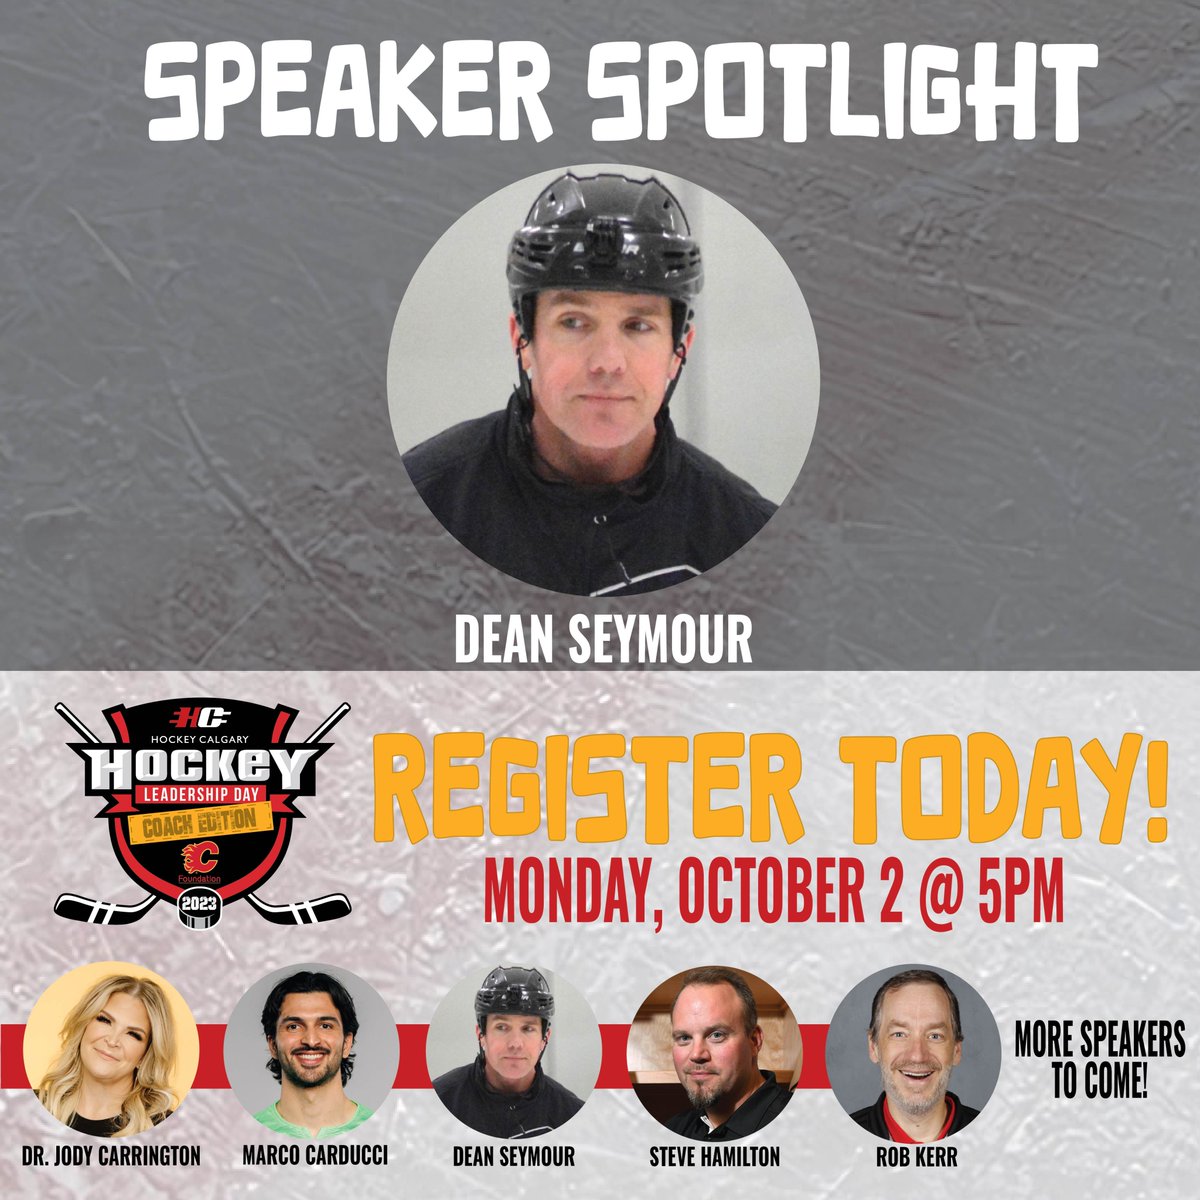 SPEAKER SPOTLIGHT ‼️ @SeymourHockey1 will join us at Leadership Day COACH EDITION to speak on Early Season Player Assessment! We can’t wait build up our hockey knowledge with help from Dean! Spots available! Check out speaker bios and register today ➡️bit.ly/3yCAJmH